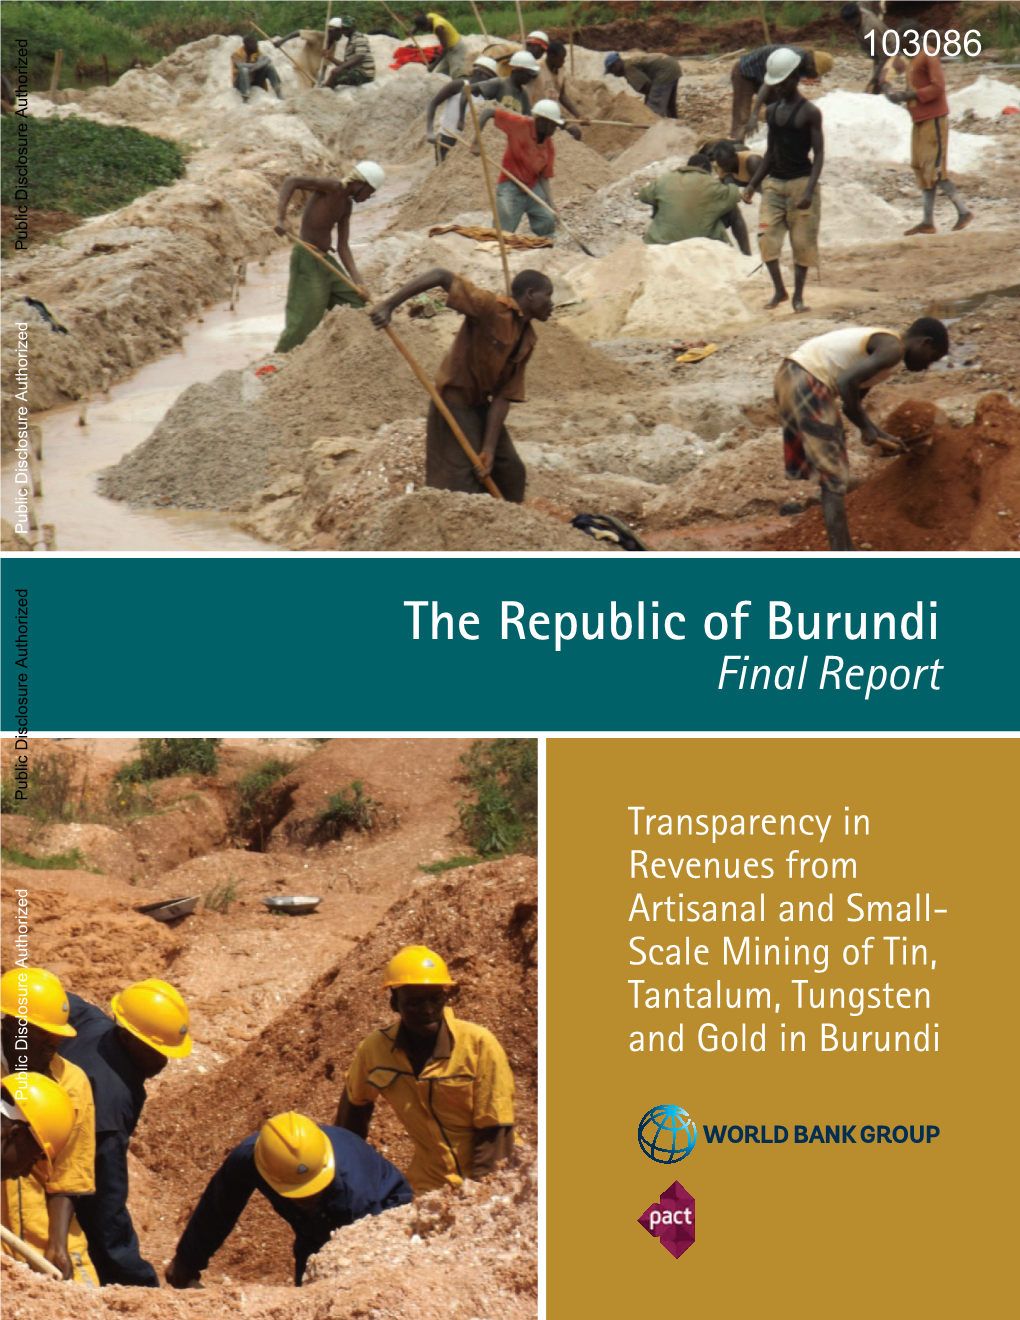 Transparency in Revenues from Artisanal and Small-Scale Mining of Tin, Tantalum, Tungsten and Gold in Burundi